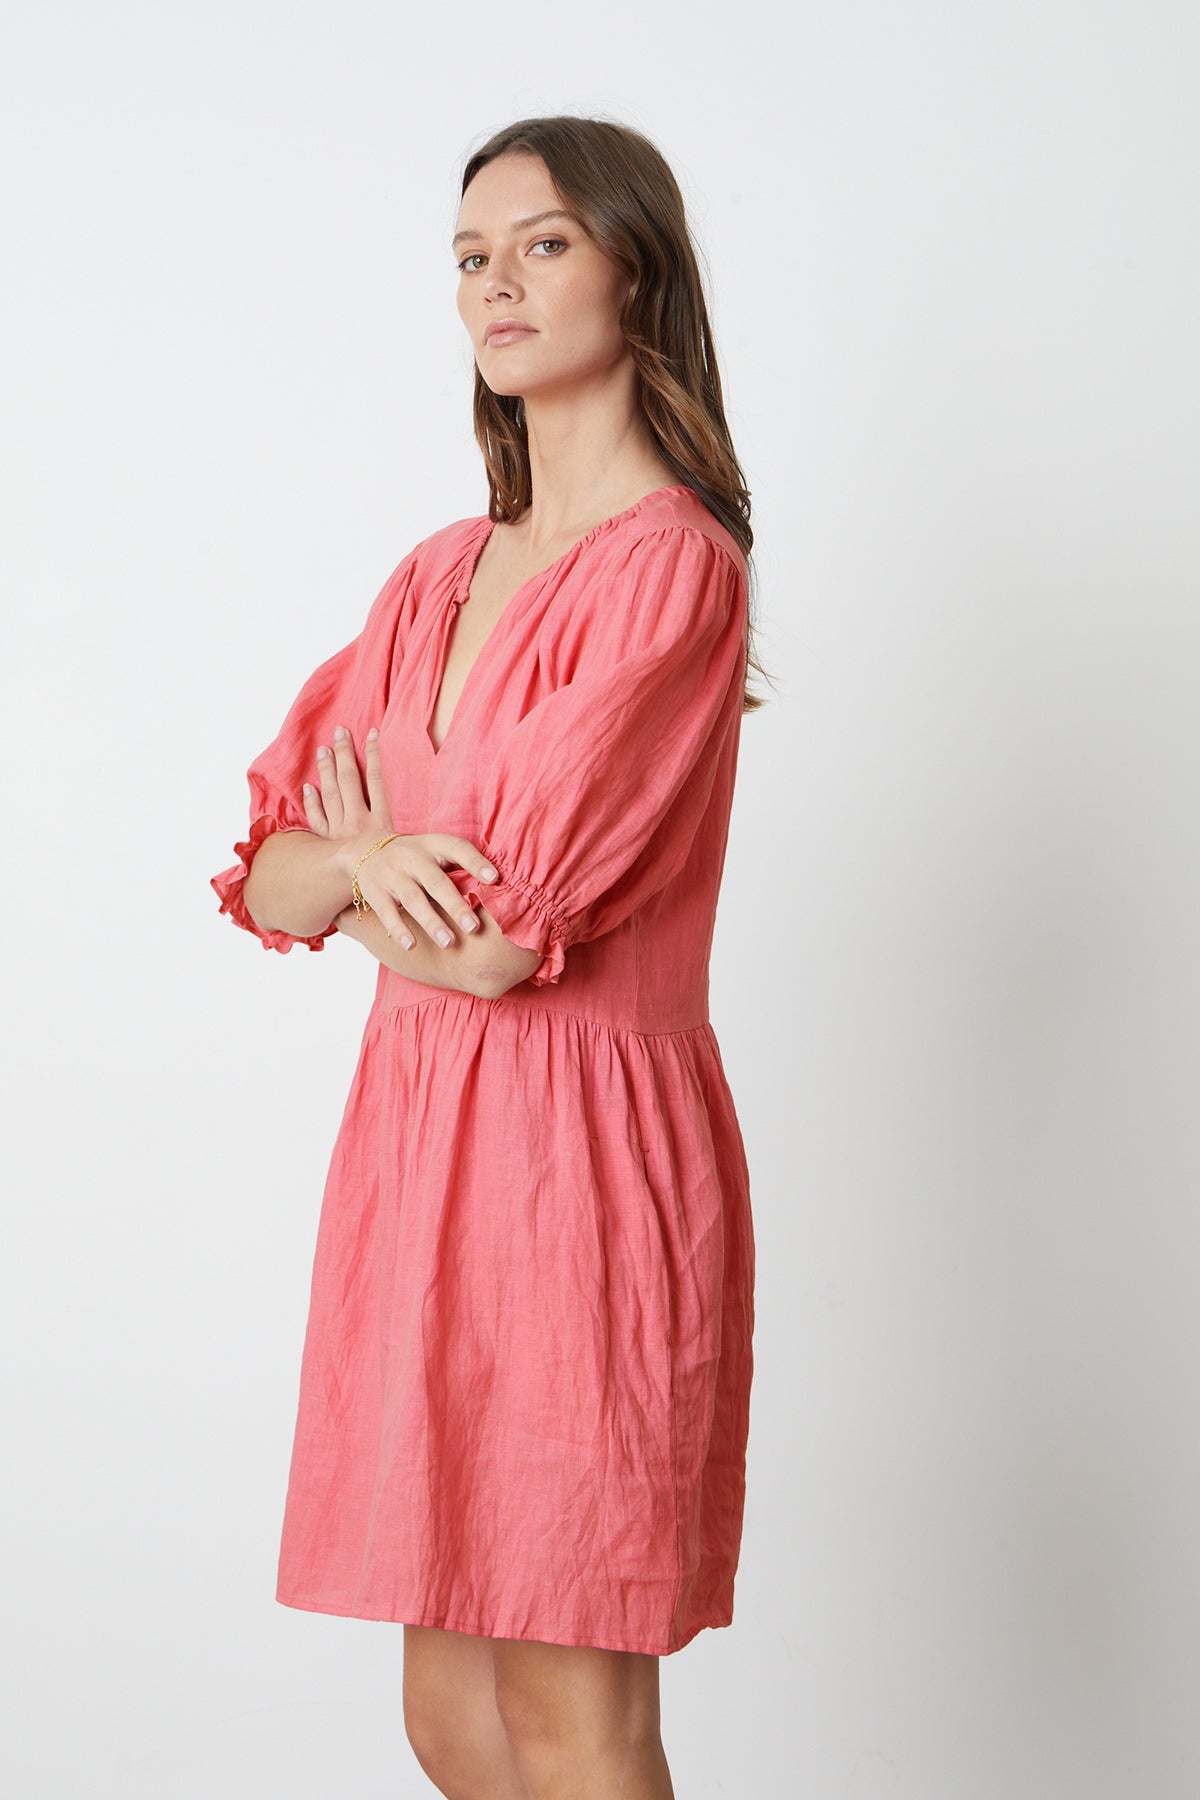 The model is wearing a KAILANI LINEN PUFF SLEEVE DRESS by Velvet by Graham & Spencer with ruffled sleeves.-26342704316609